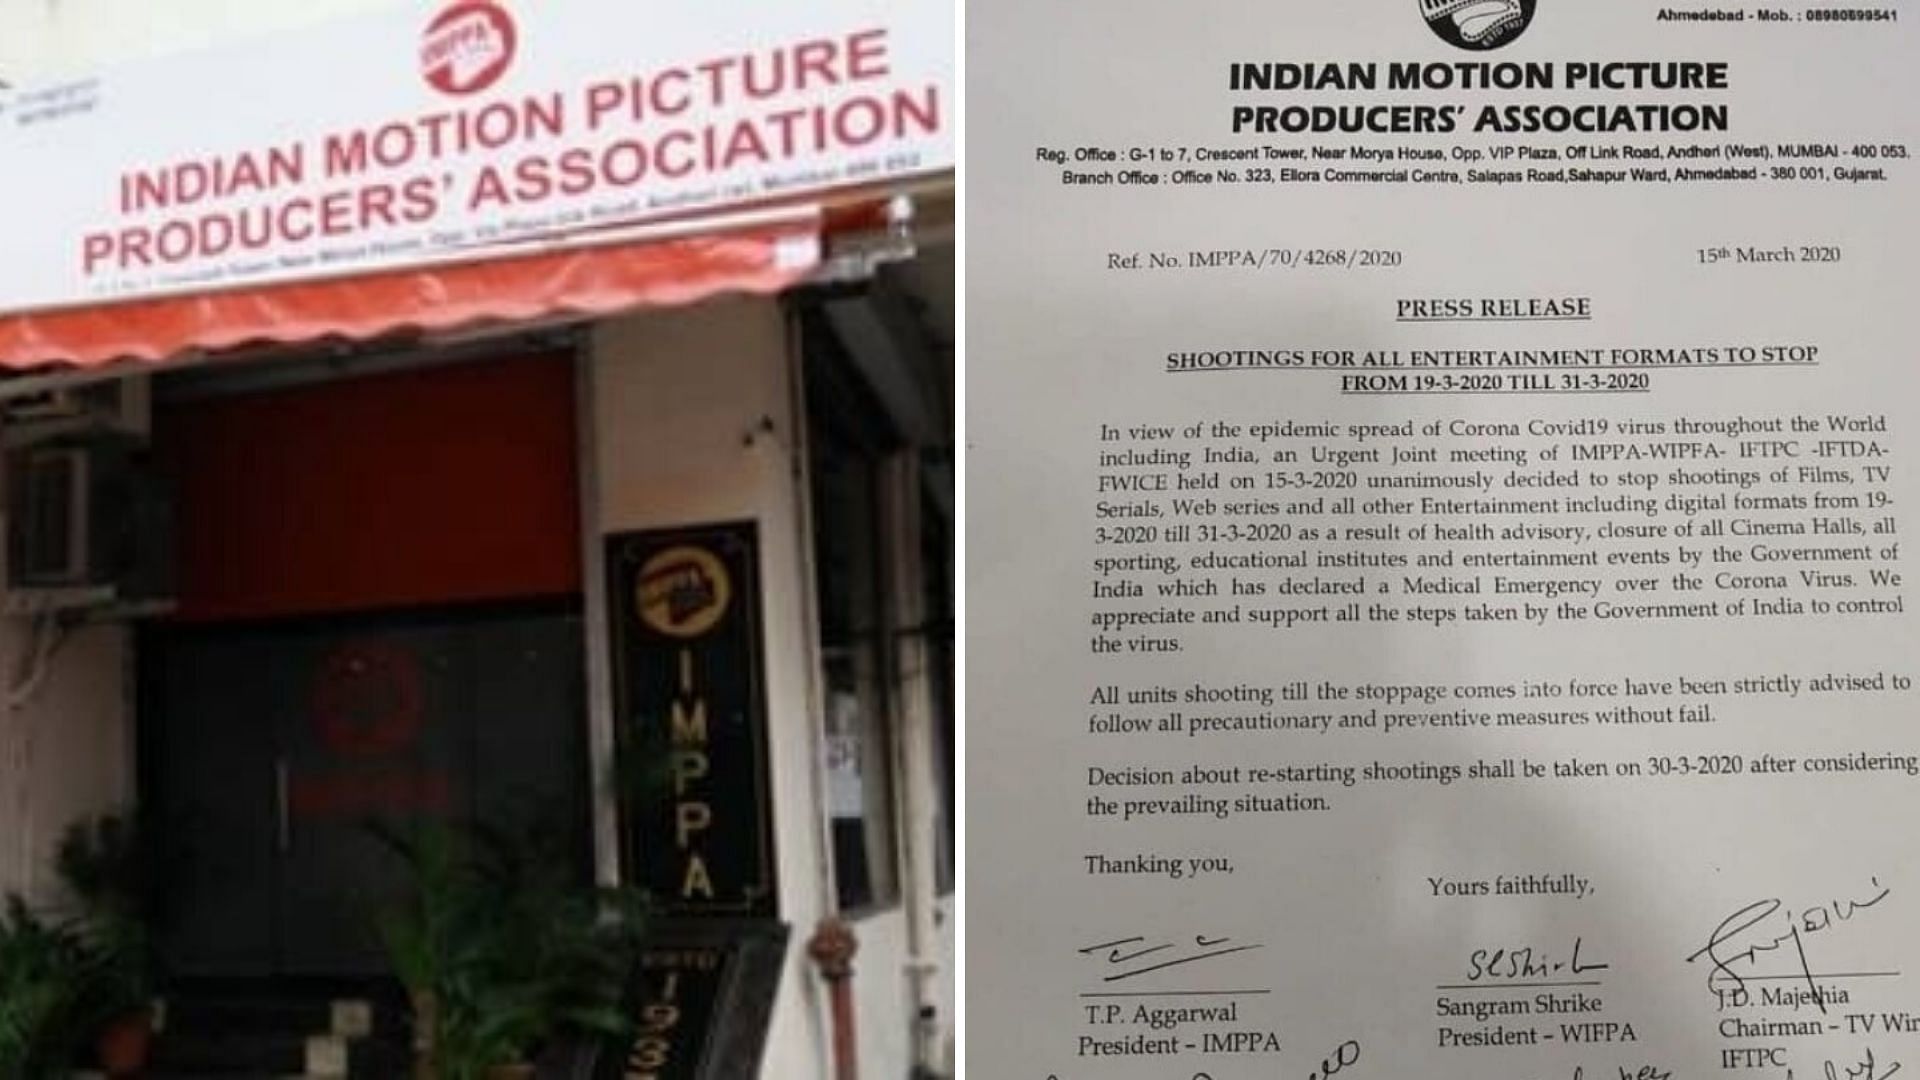 IMPPA has taken a decision to stop the shootings for all films, shows.